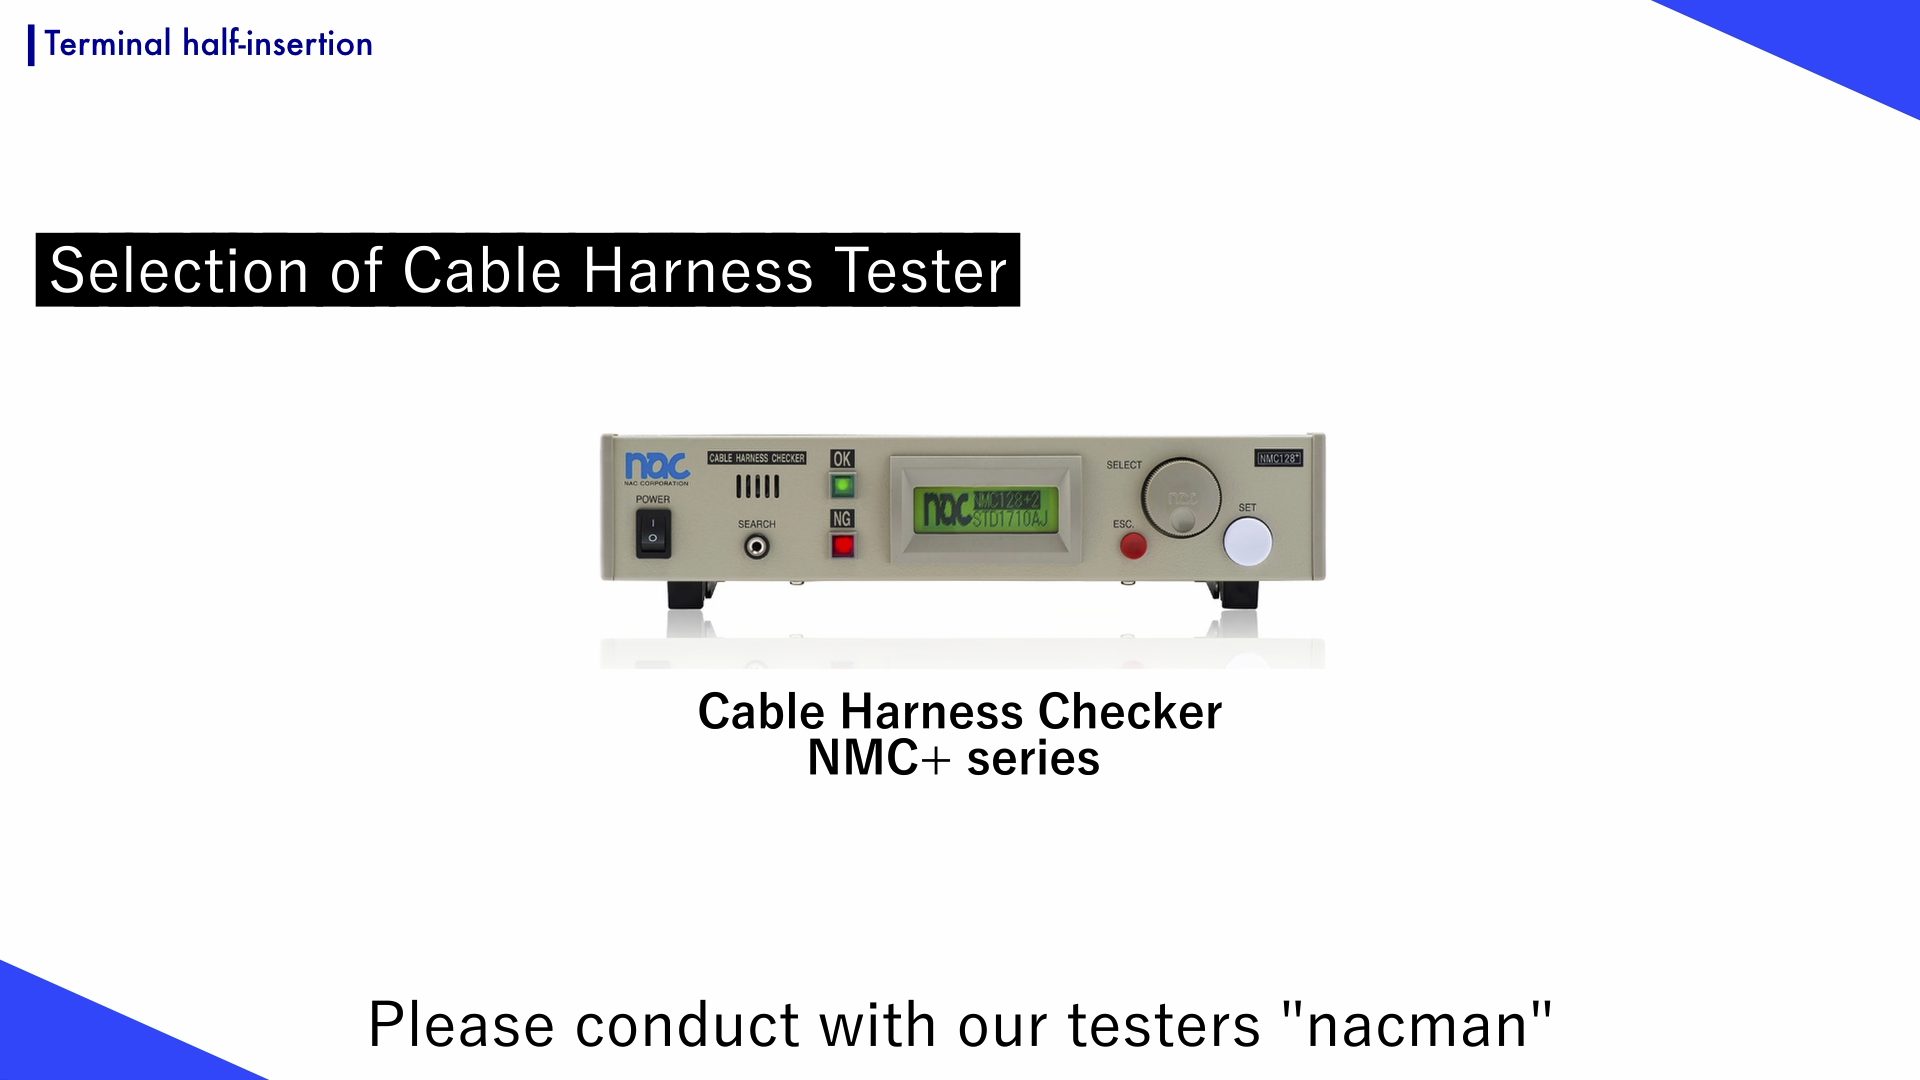 nacman cable harness testers available to check for momentary disconnections.